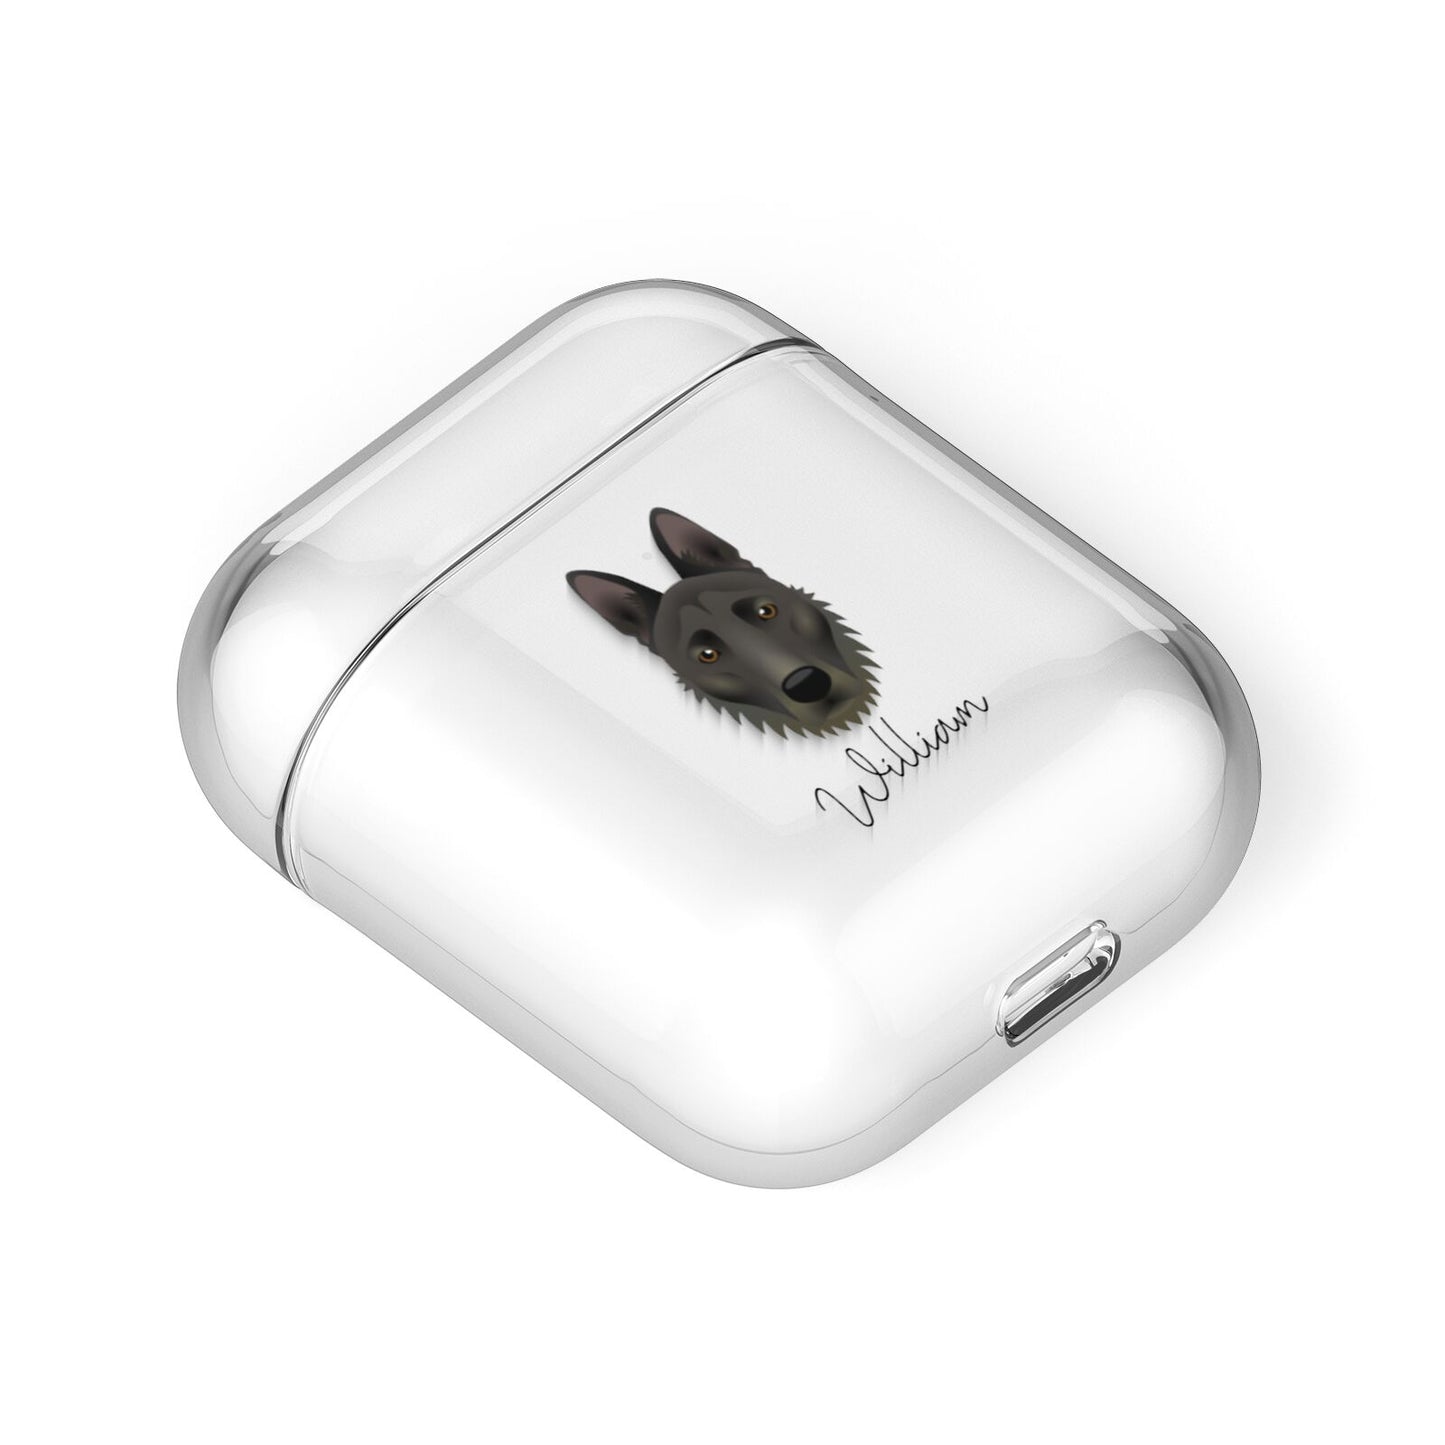 Dutch Shepherd Personalised AirPods Case Laid Flat